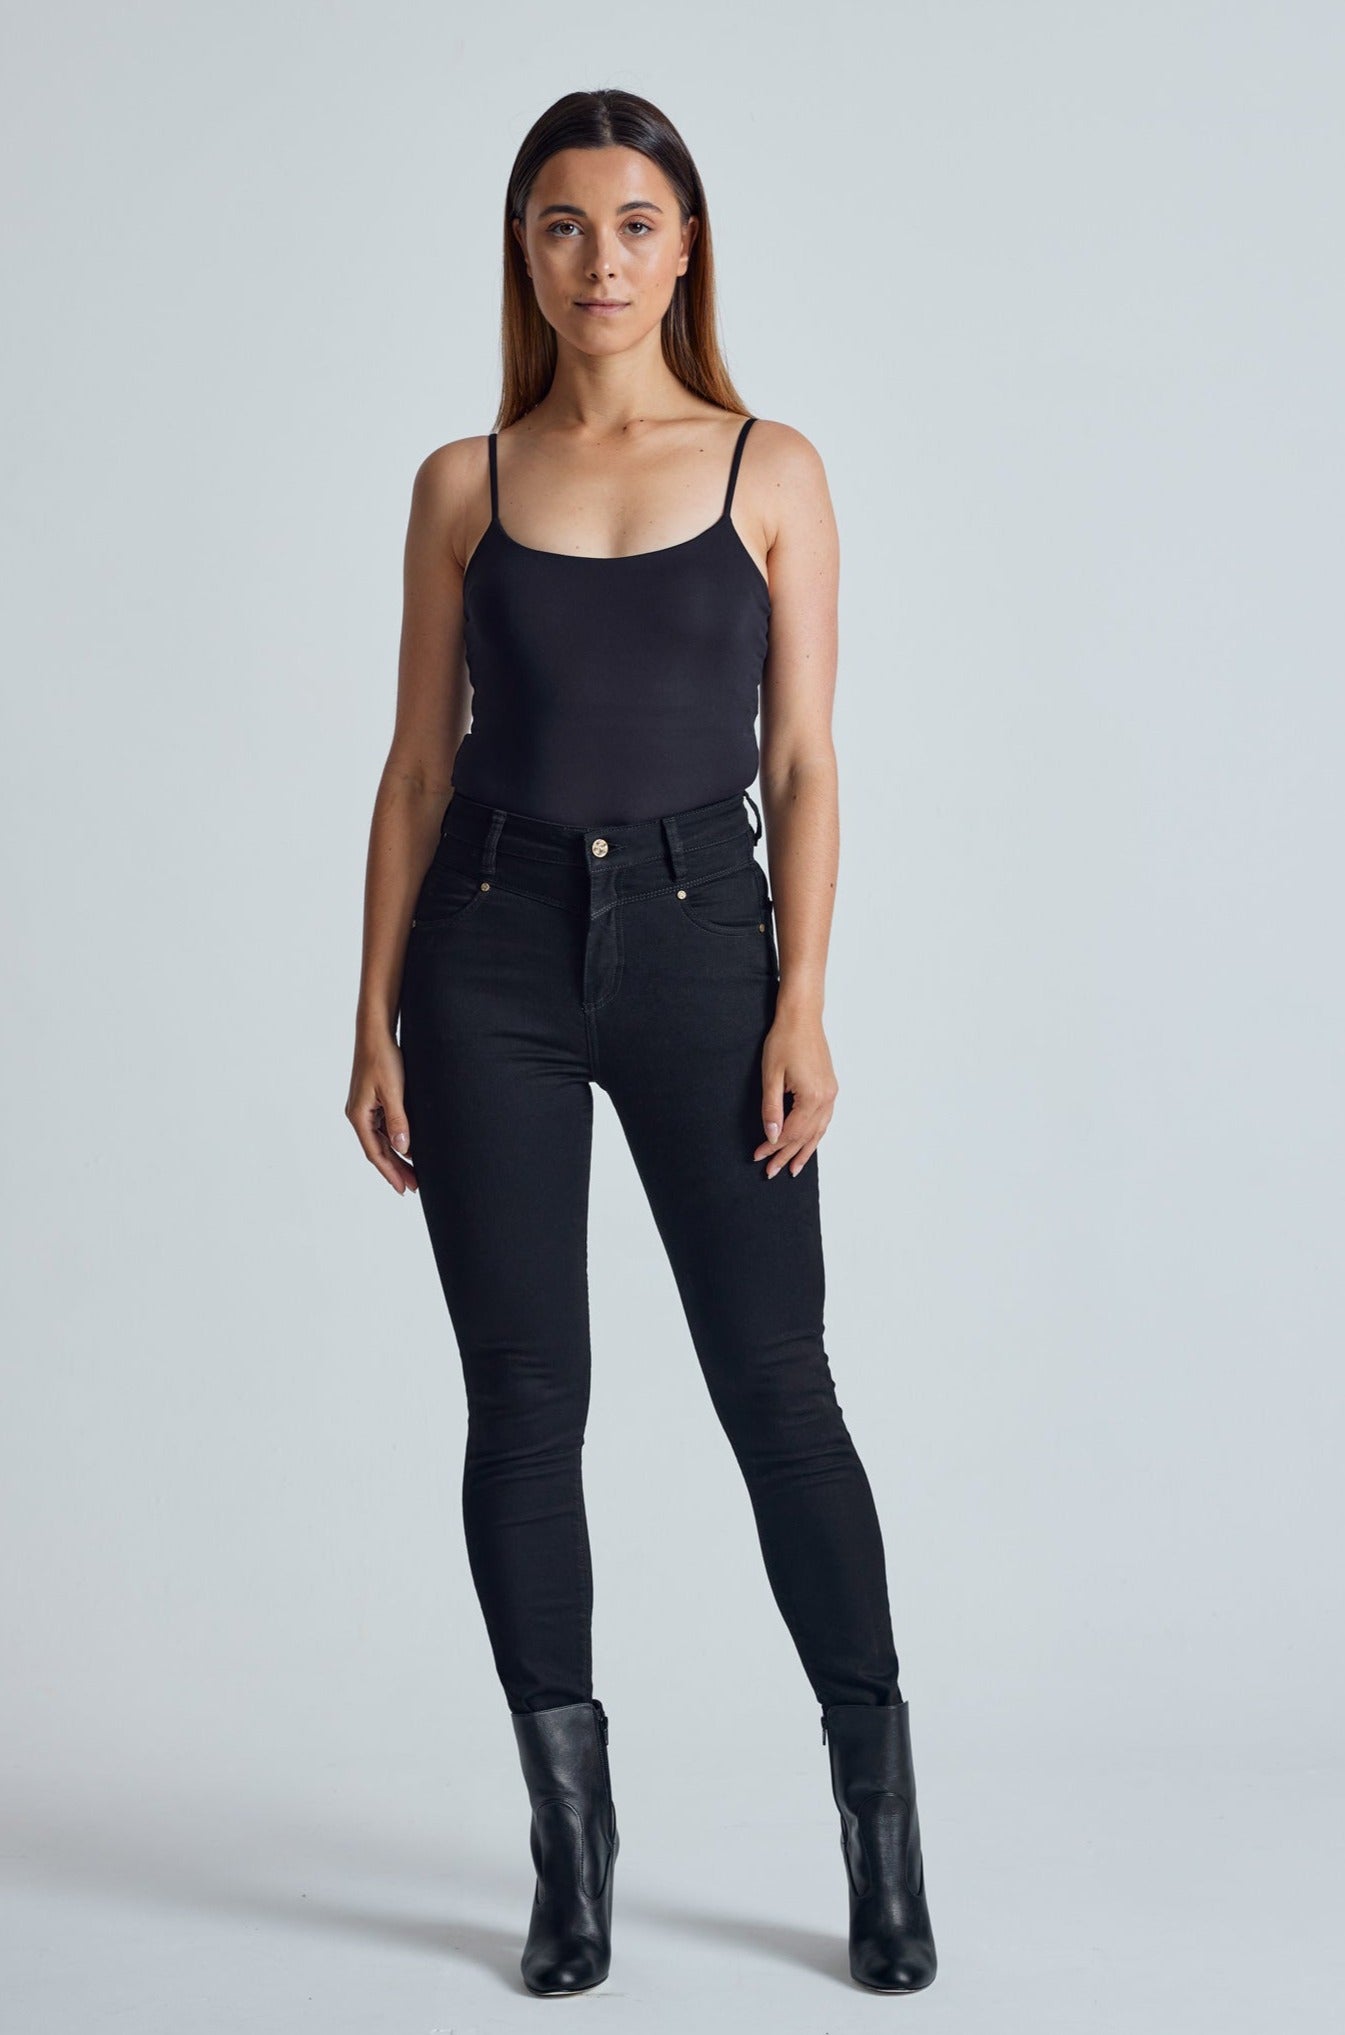 Ebony Nina High Waisted Skinny Jeans - GOTS Certified Organic Cotton and Recycled Polyester